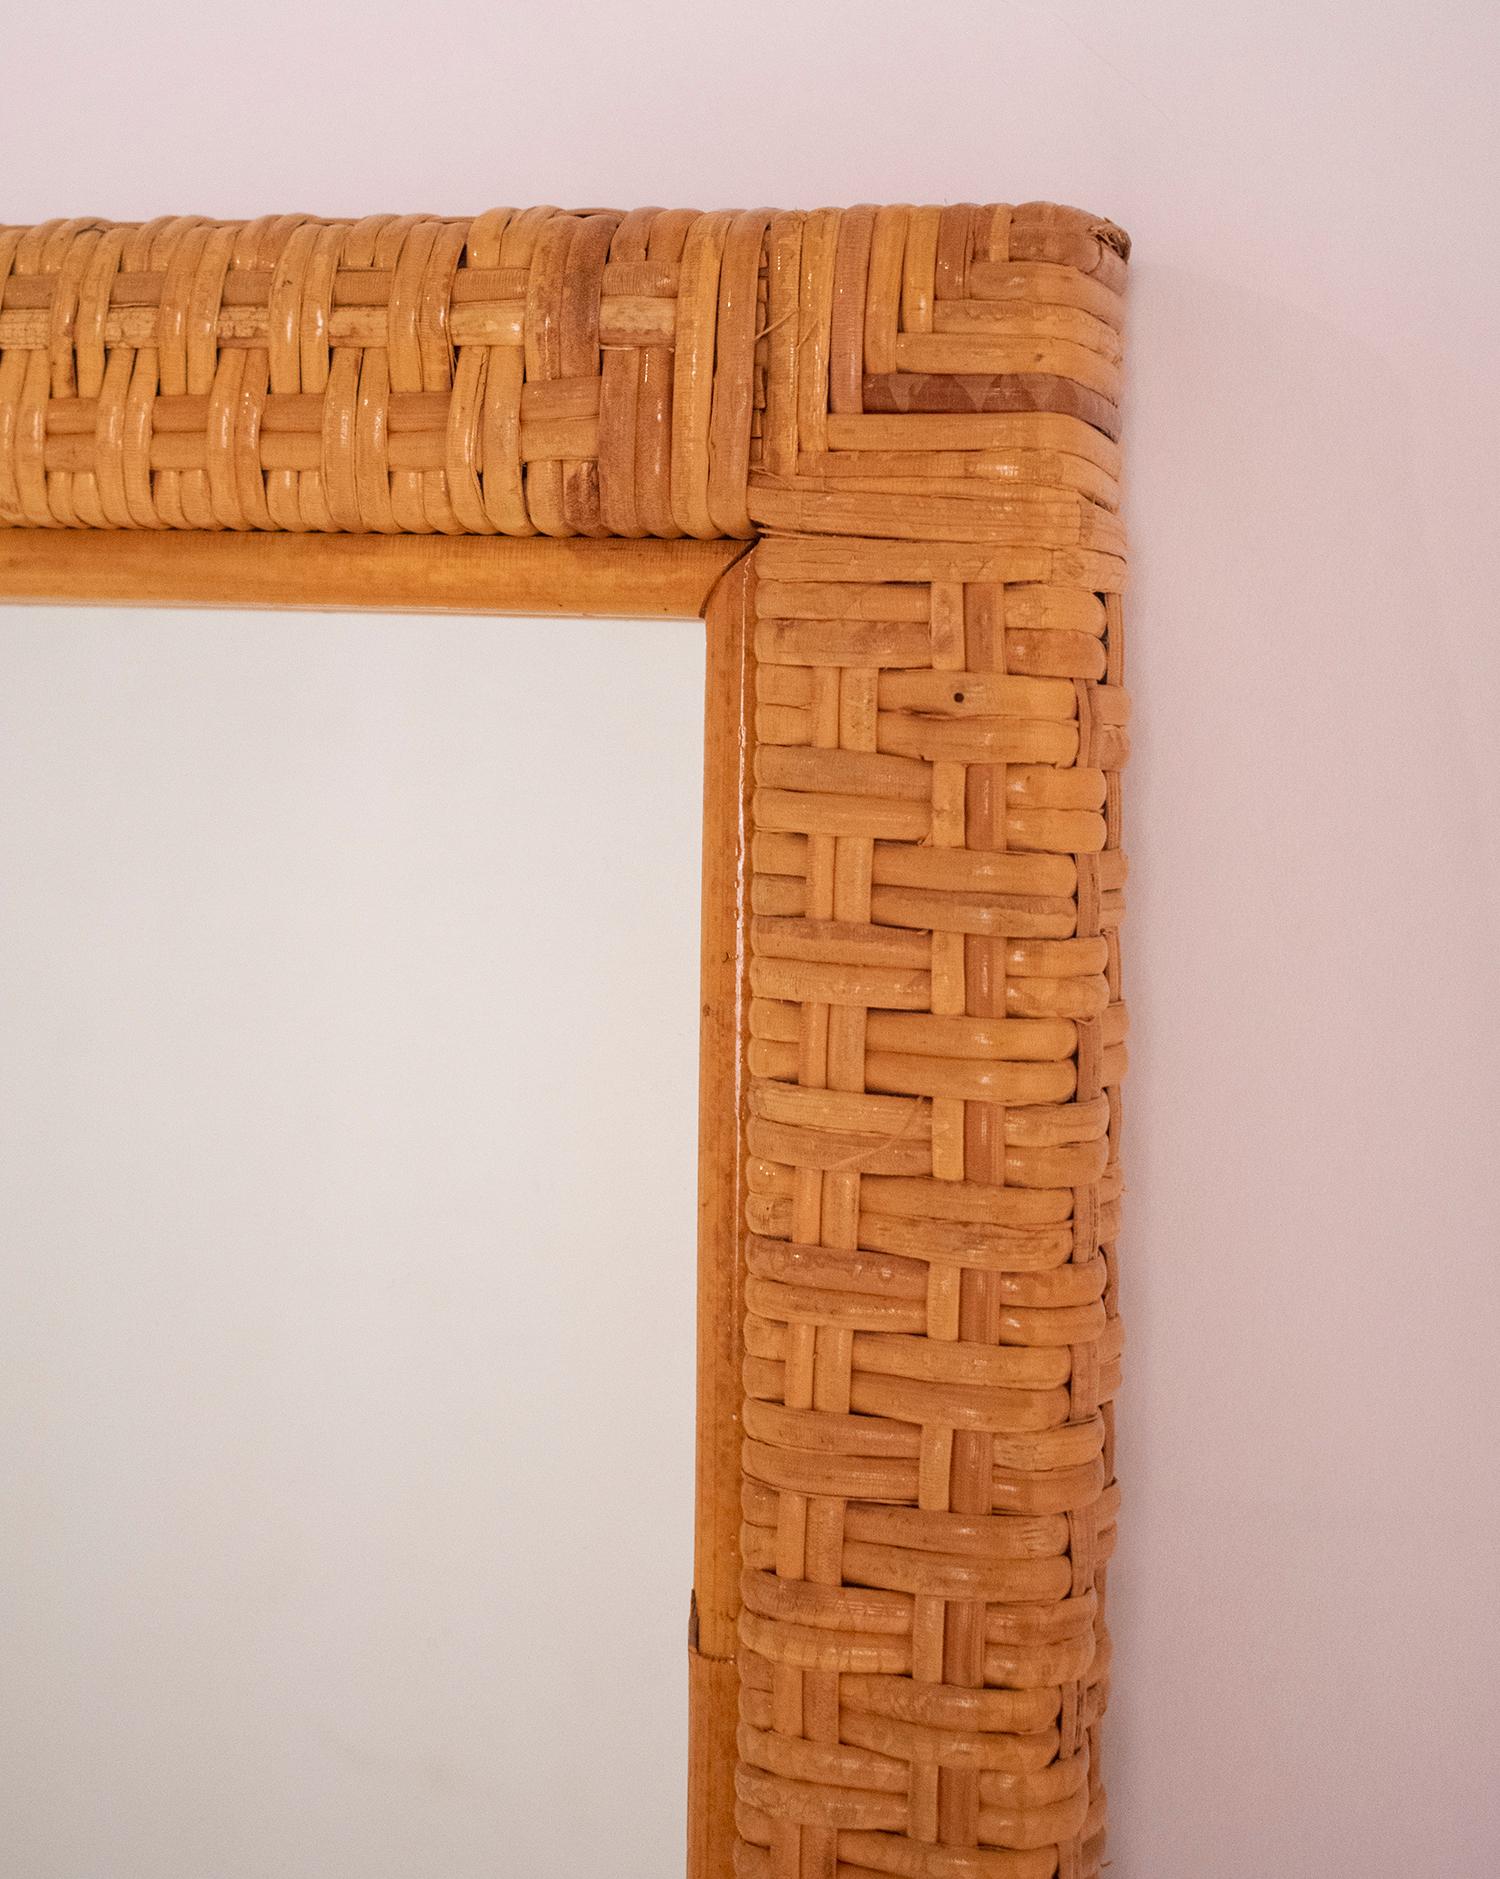 Nice midcentury rectangular  cane and woven wicker mirror. This fantastic piece was designed in Spain during the 1970s.
It is to be placed vertically, but the mirror could also be placed horizontally.
The wicker weave is very beautiful and they are